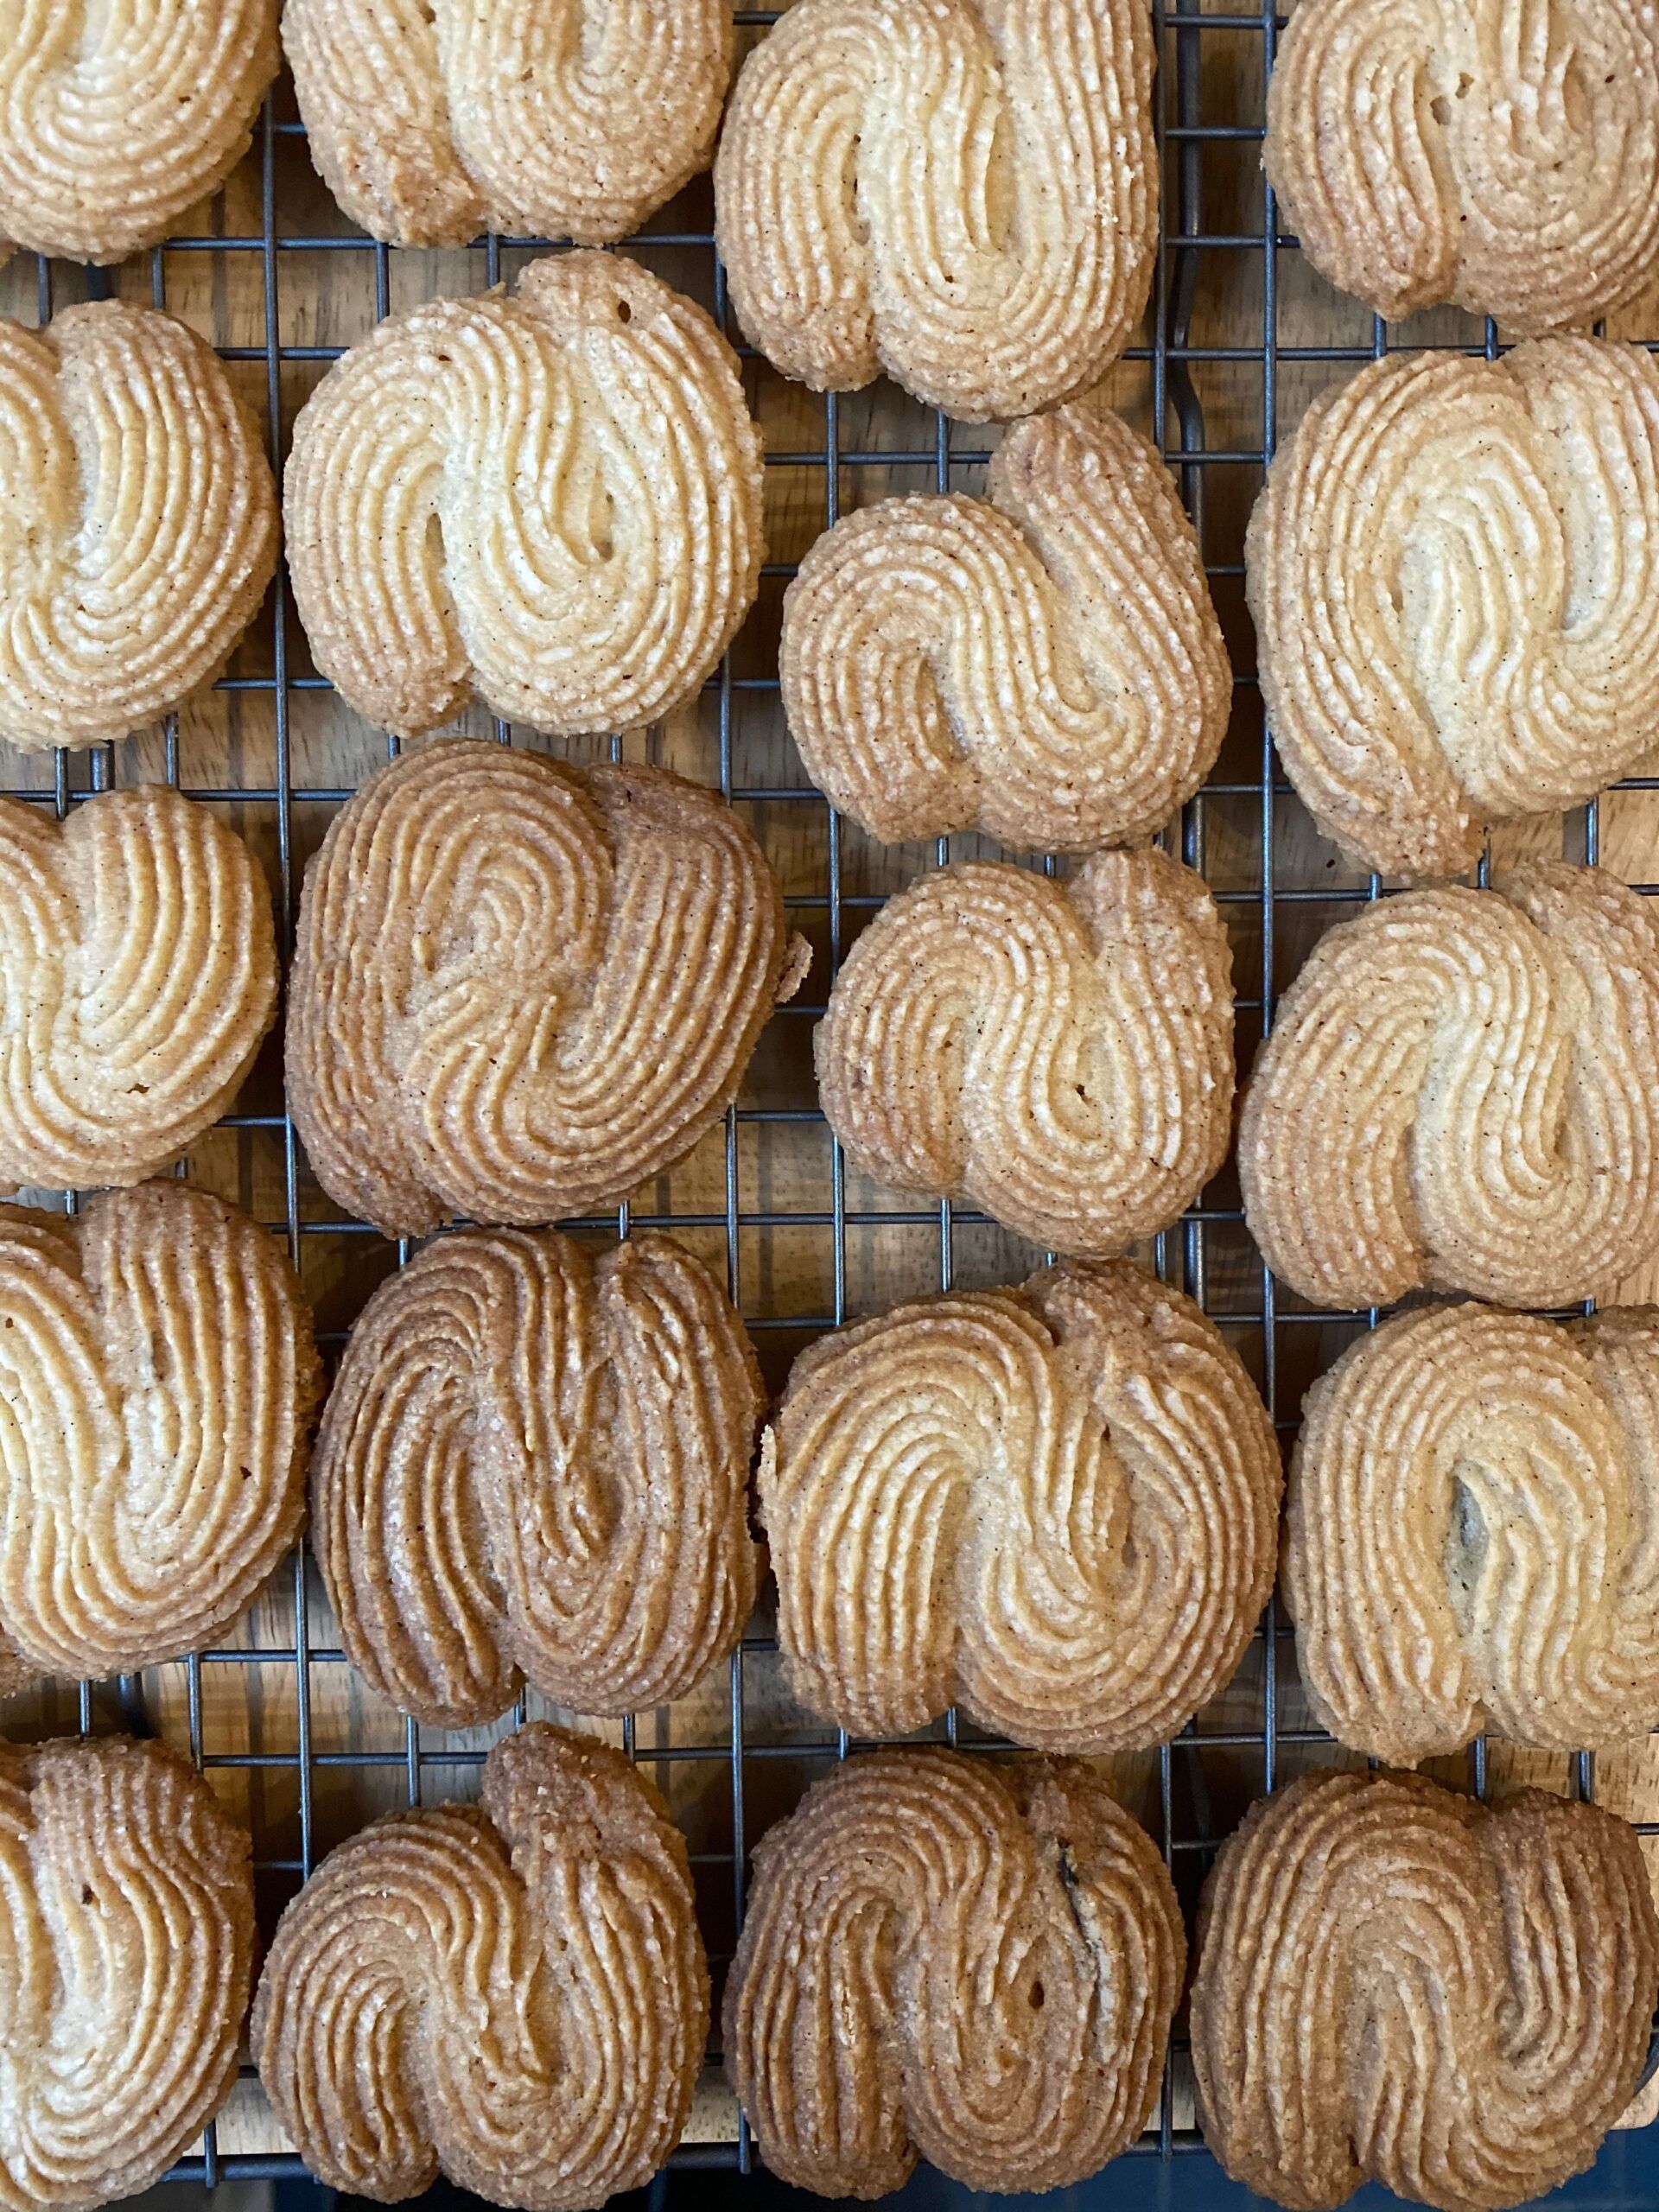 Rows of buttery, S-shaped cookies, with little golden brown ridges along their tops.